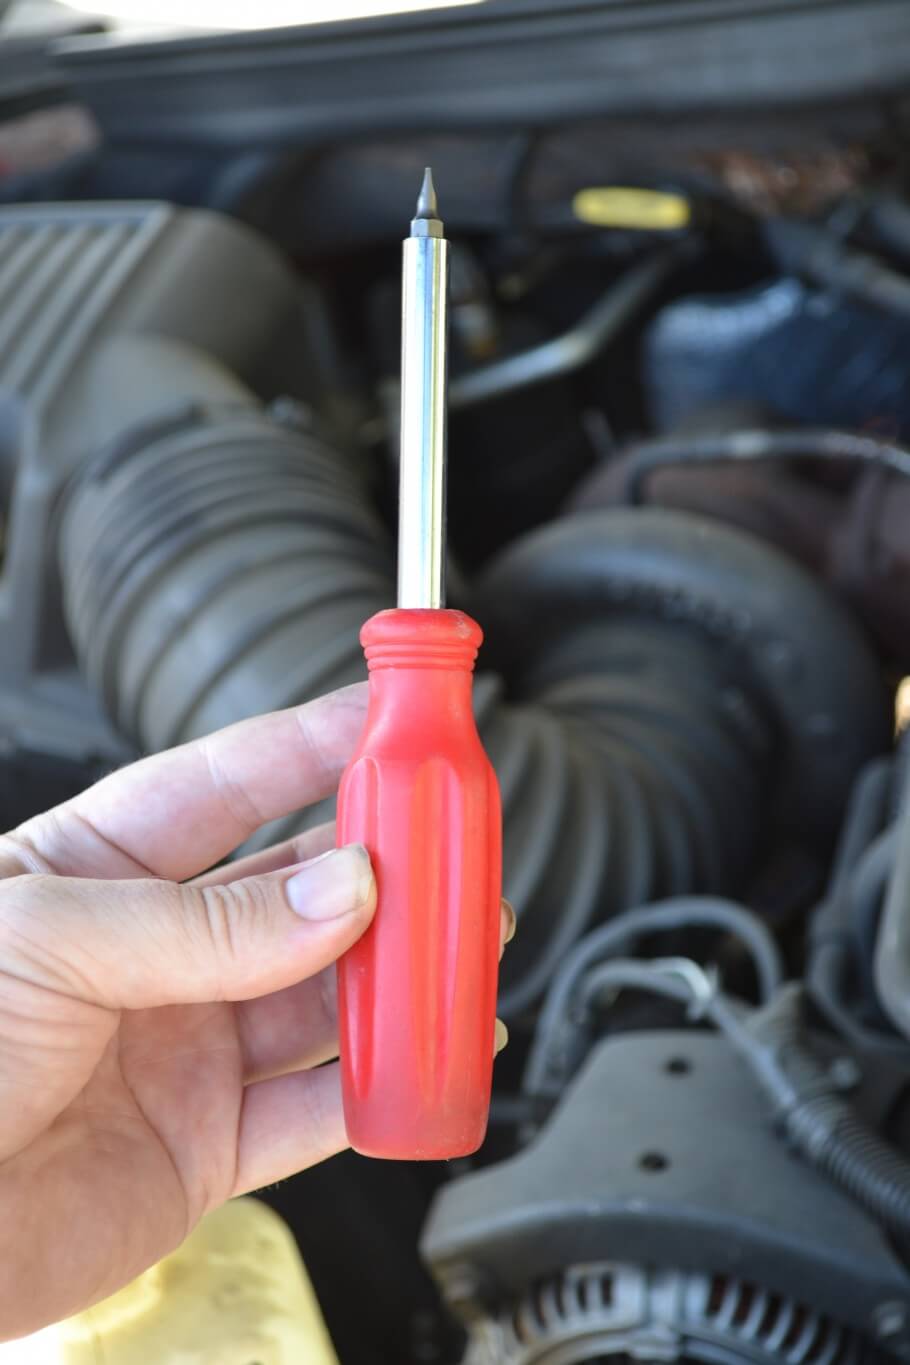 3. To show just how easy an intake install can be, we're going to use a single multi-use screwdriver for the majority of the job and not even a good one, either.